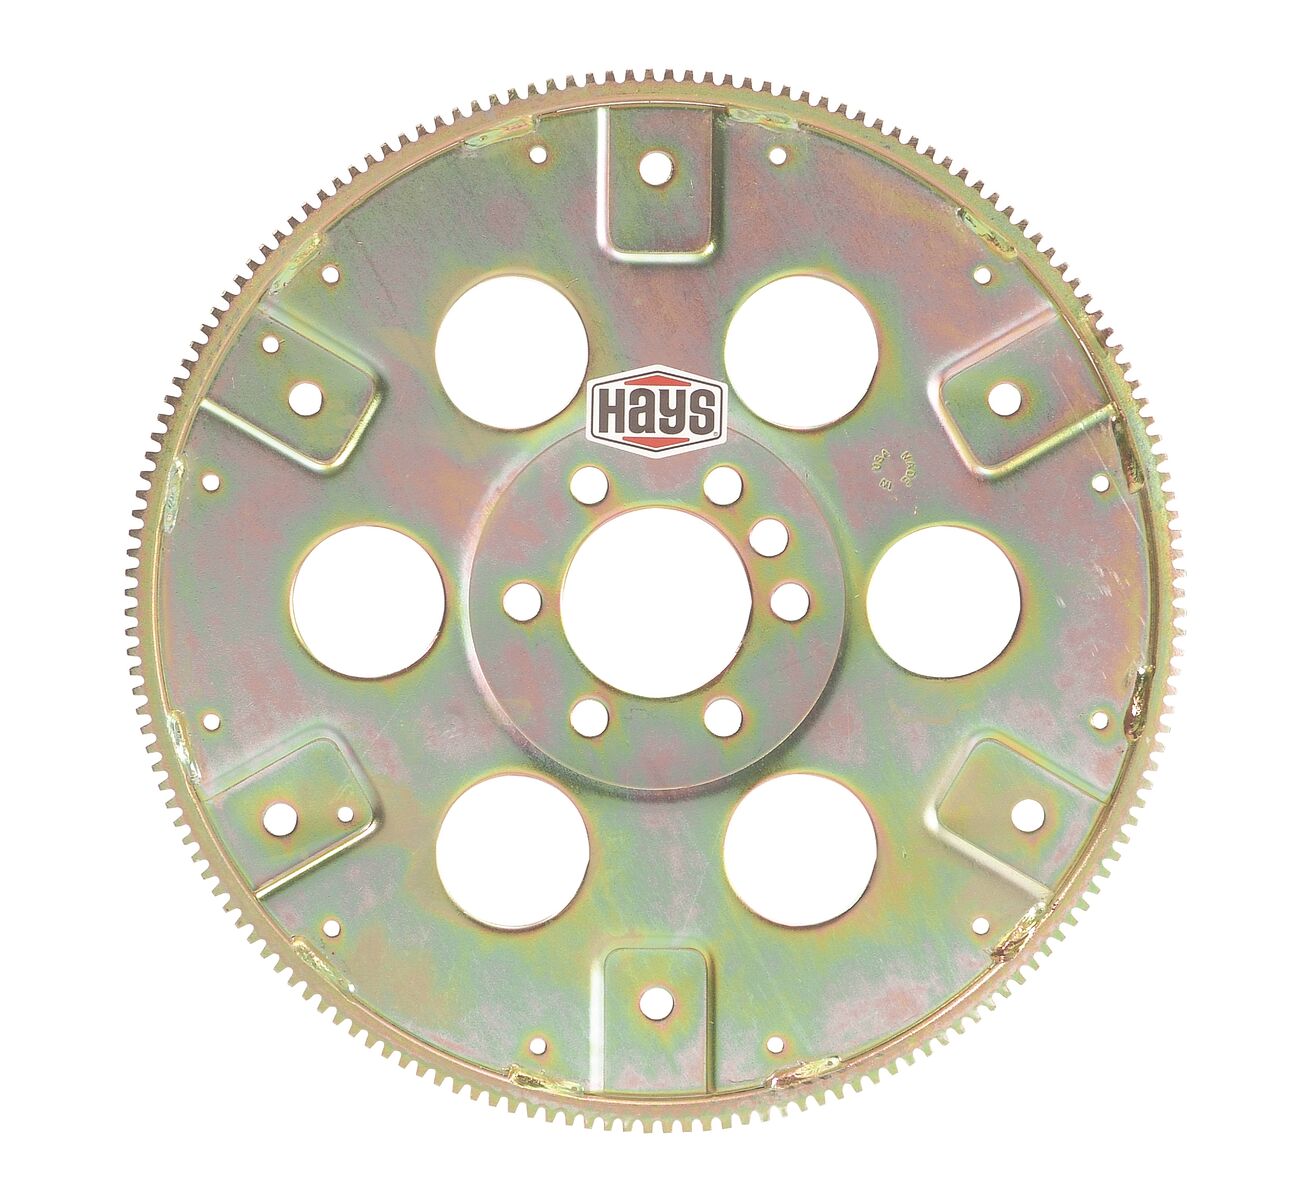 PRW 168-Teeth Internal Balance SFI-Rated Chrome-Moly Steel Flexplate with 6-Bolt Convertor 4L80E/4L-85 for Chevy Vortec 8100 1849600 